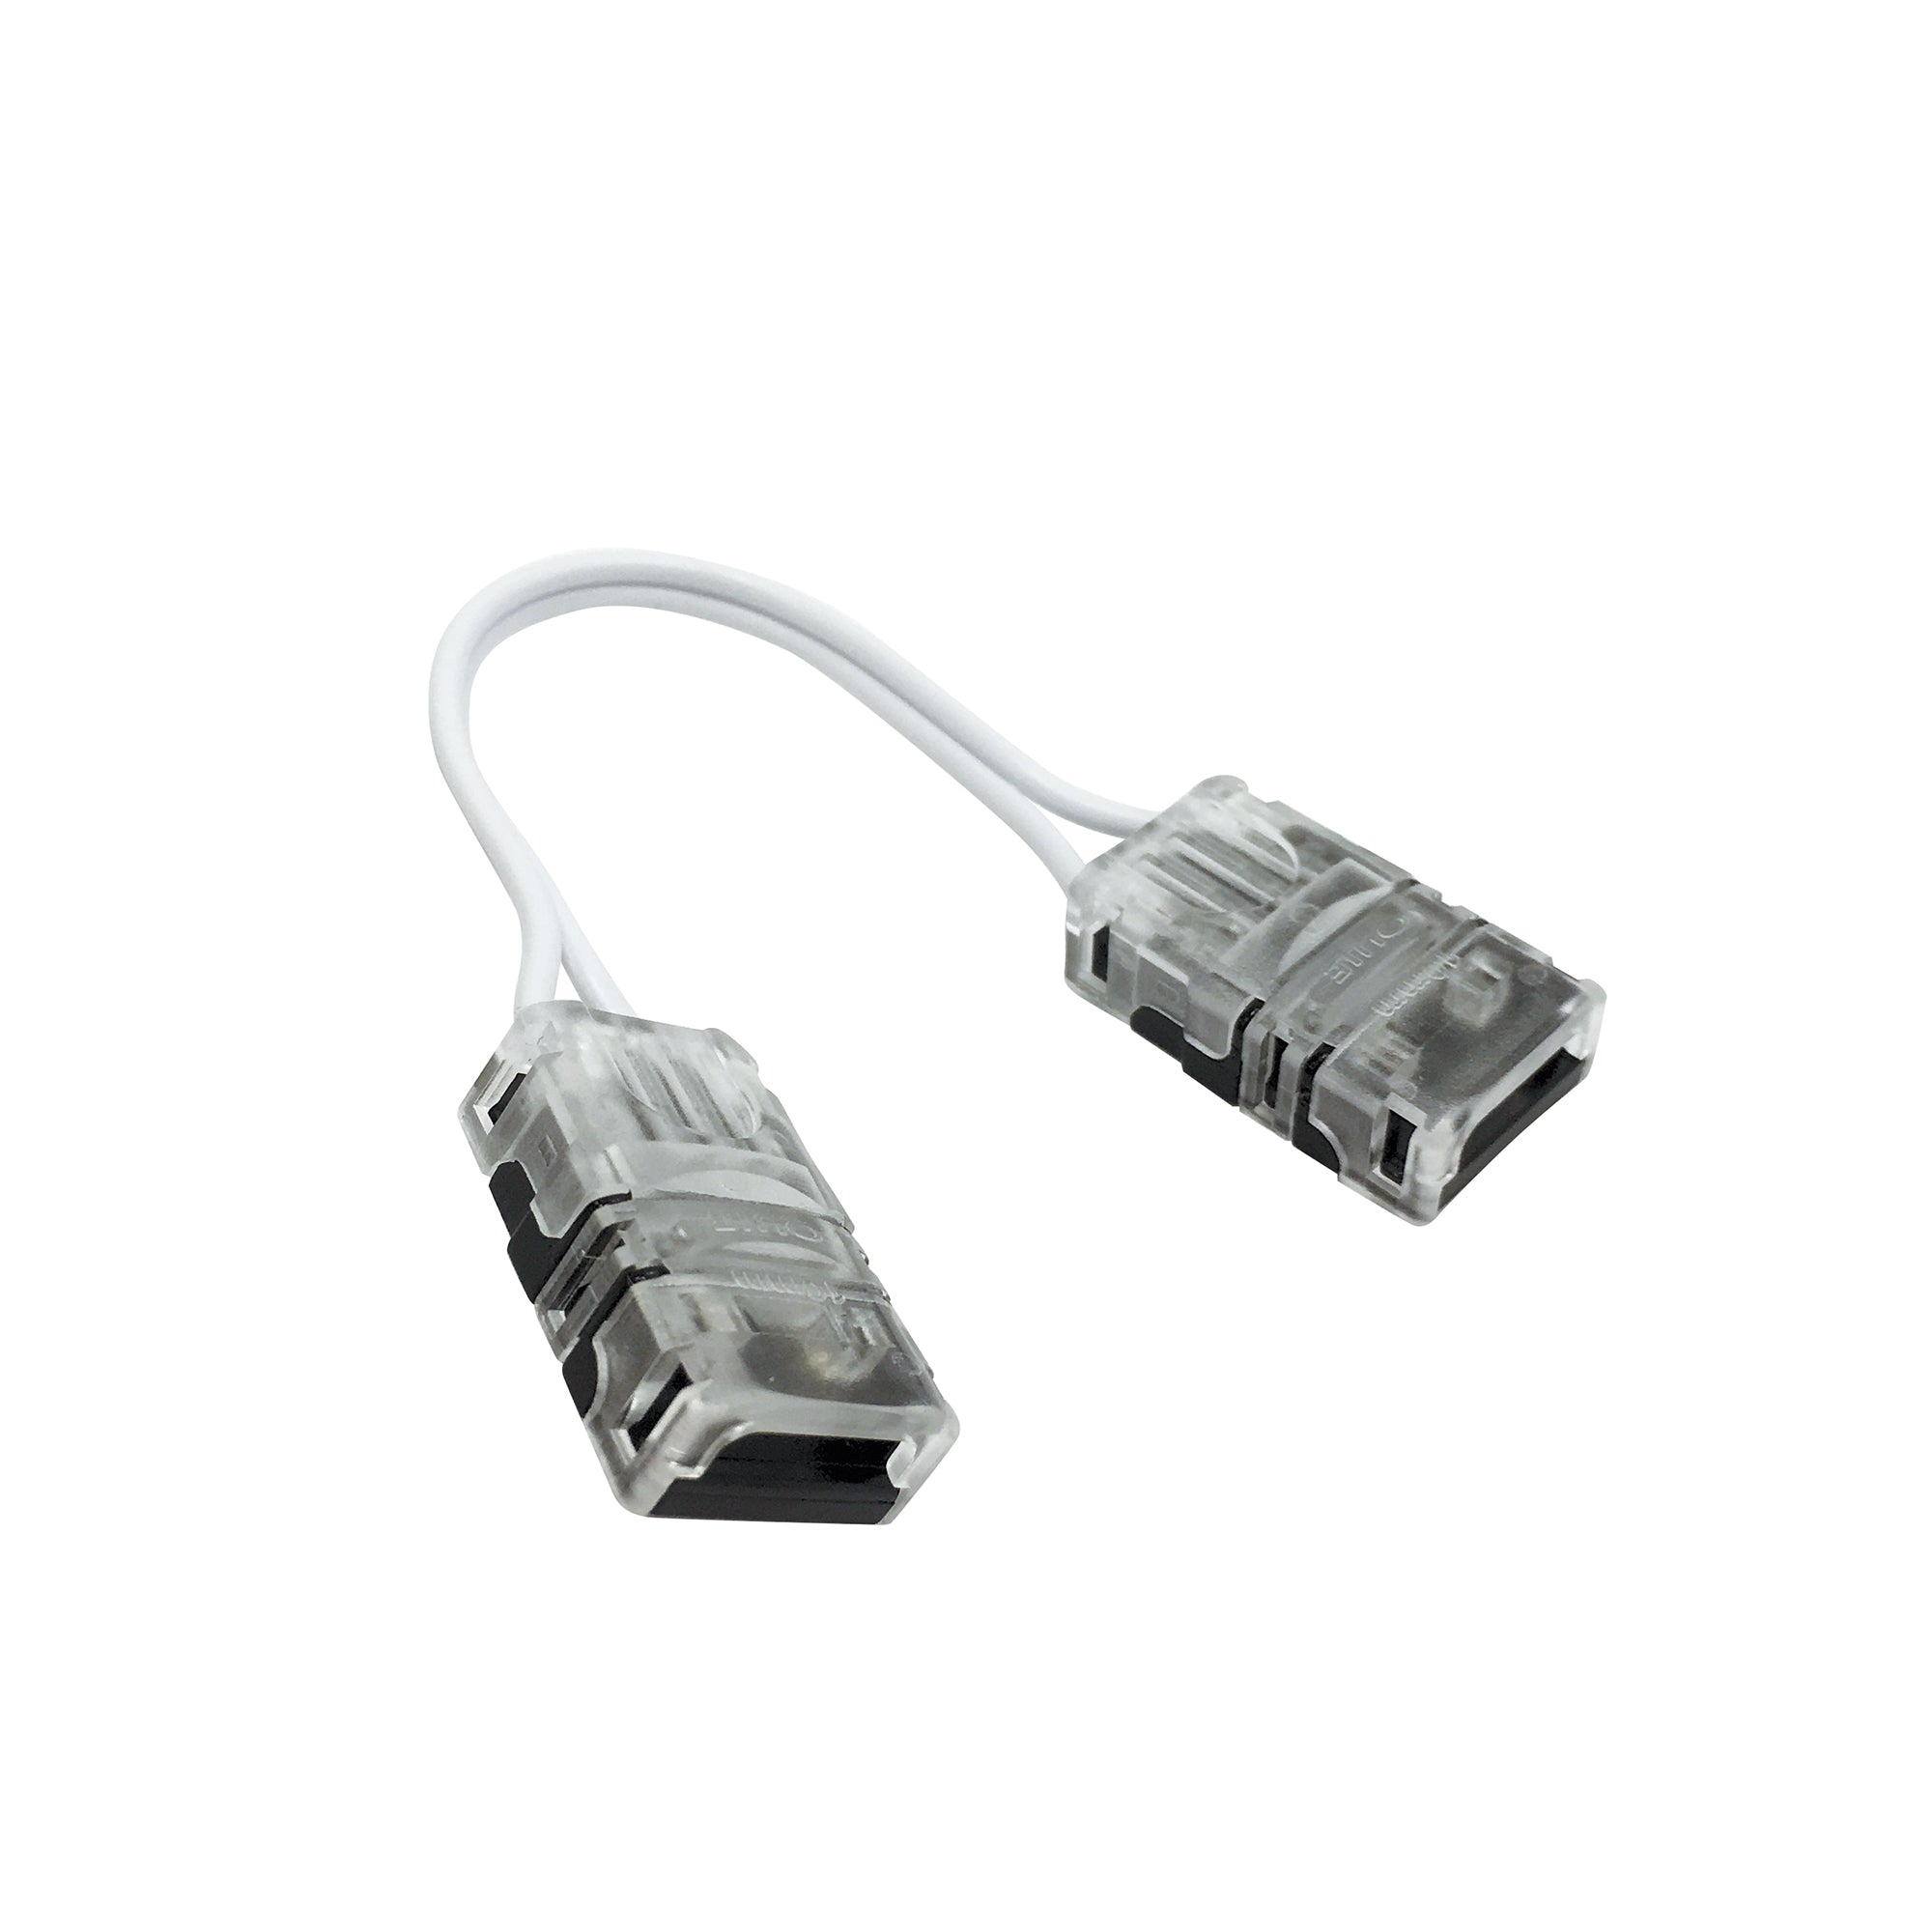 Nora Lighting NATLCD-272 72" Interconnection Cable For NUTP12 Comfort Dim Tape Light - White